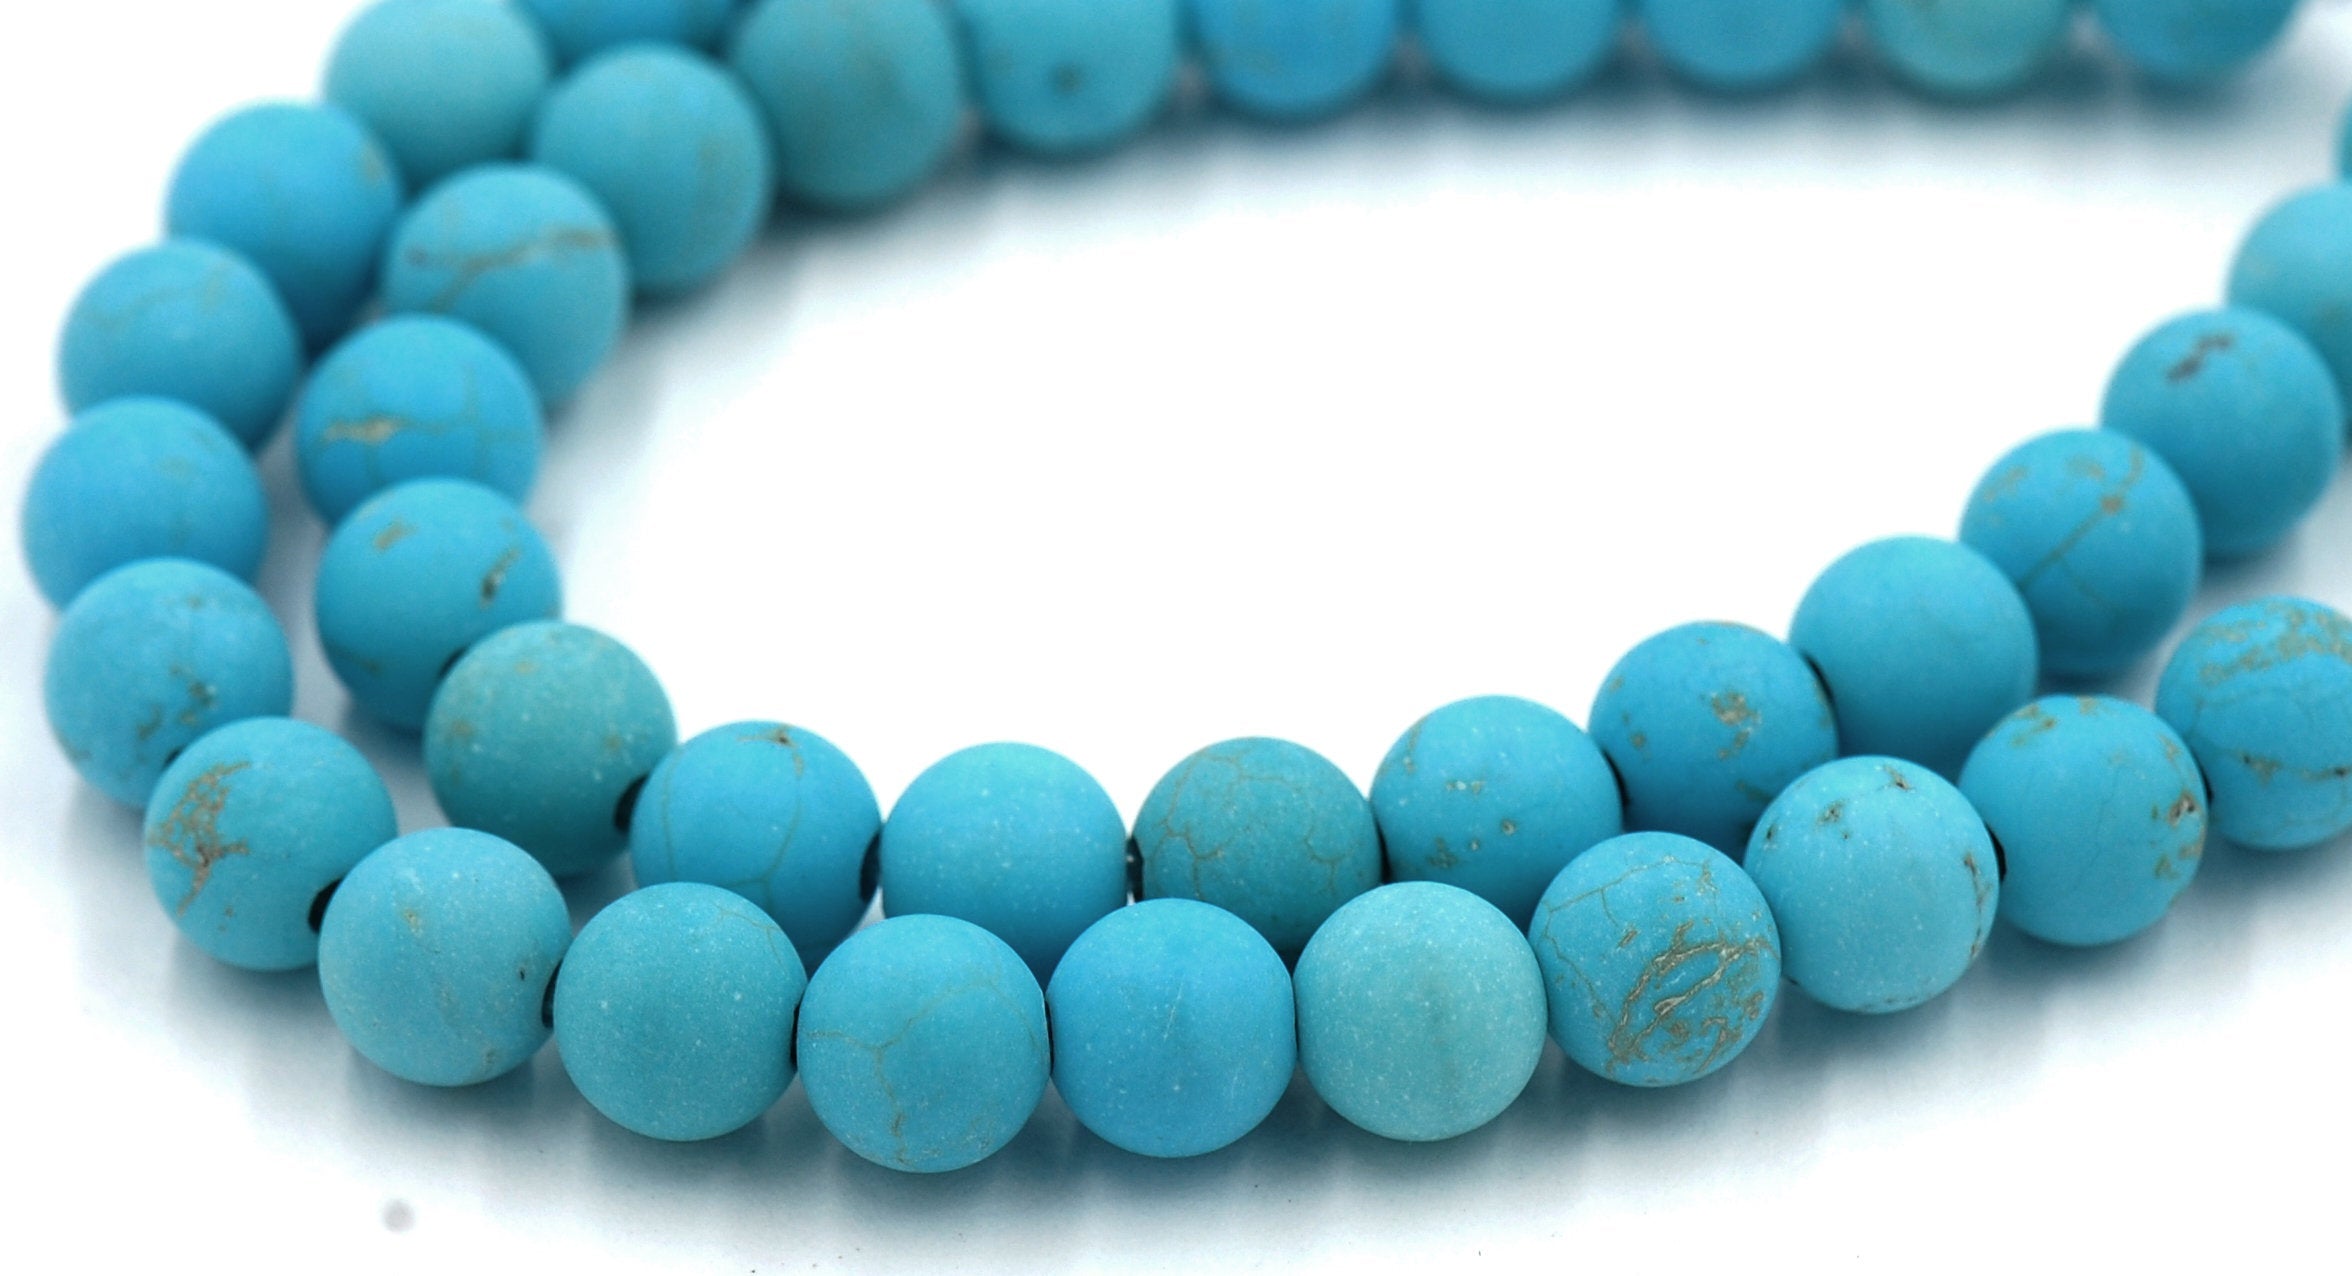 Large Hole Matte Turquoise Magnesite 4mm, 6mm, 8mm, 10mm, 12mm Round Beads -15 inch strand